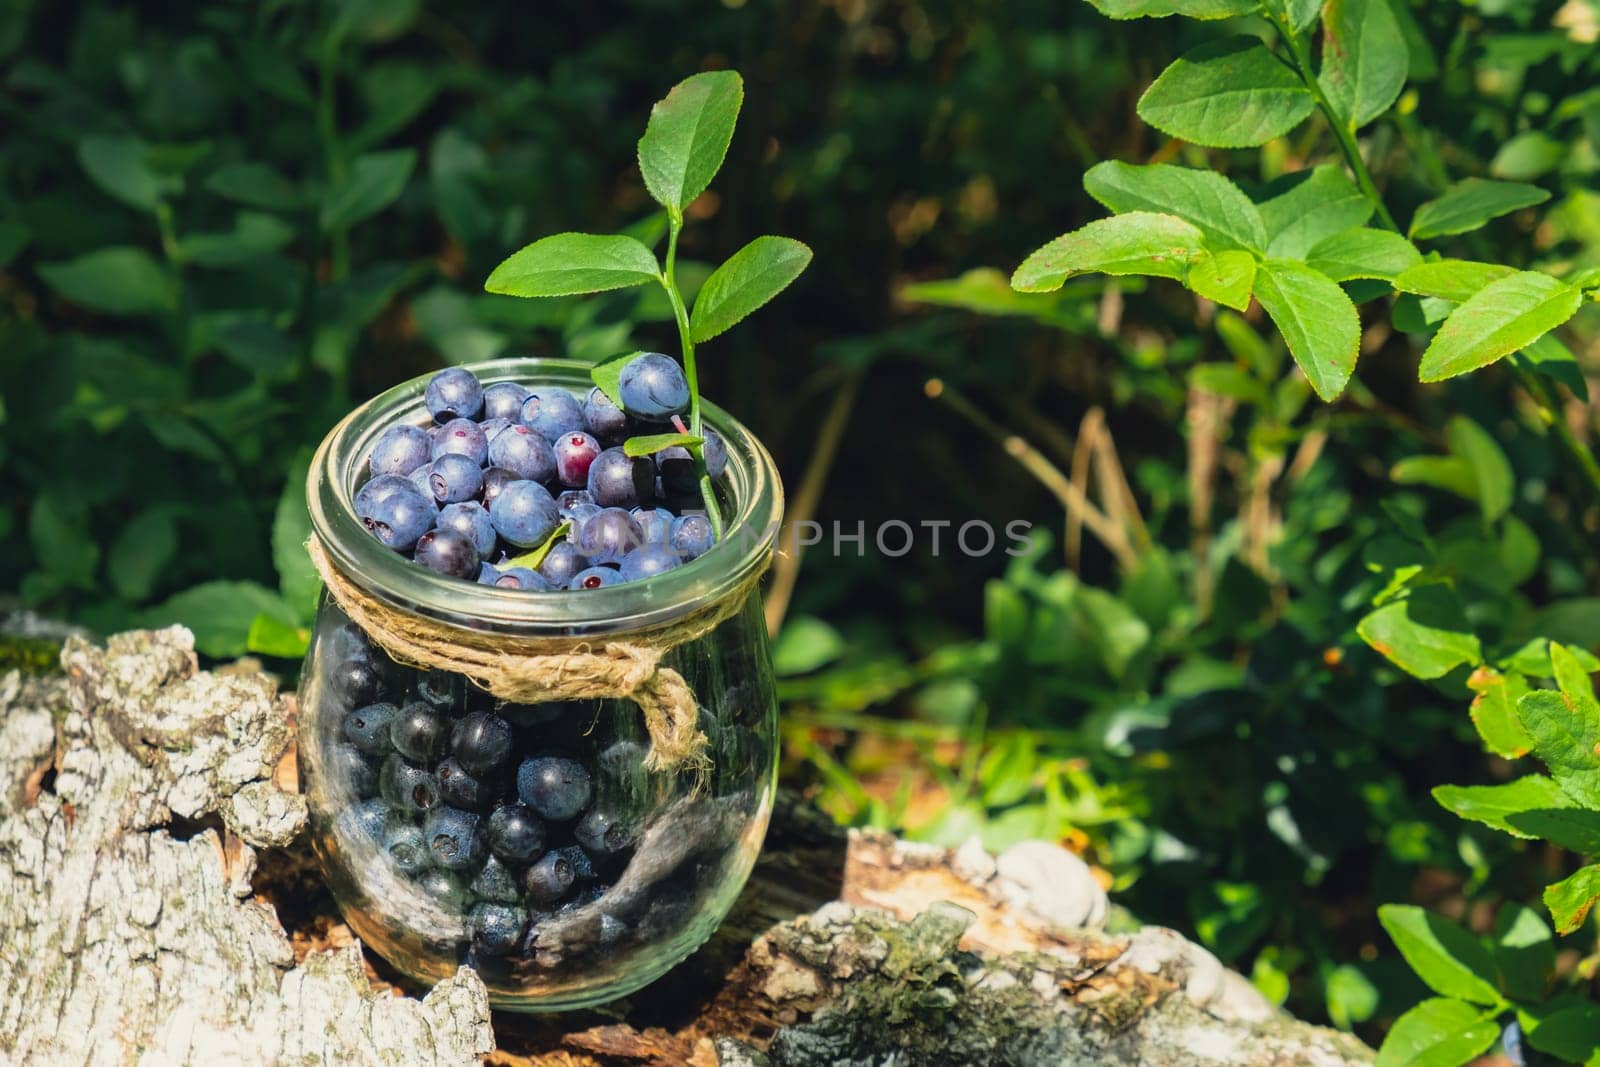 Close-up of Blueberries in the forest with green leaves. Country life gardening eco friendly living Harvested berries, process of collecting, harvesting berries into glass jar in the forest. Bush of ripe wild blackberry bilberry in summer.